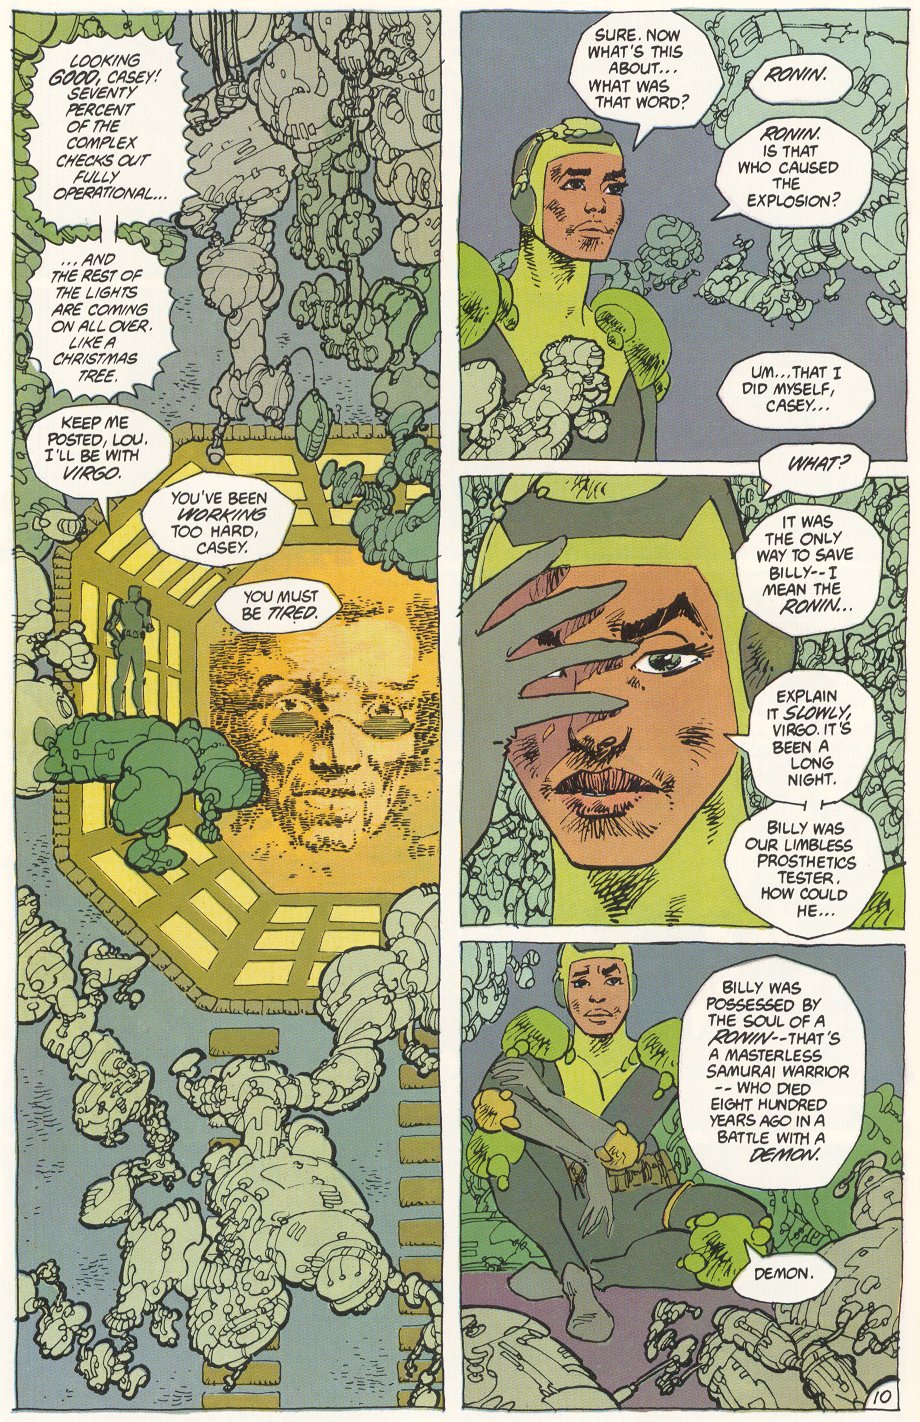 Ronin Vol. 1 Issue #2 (1983), DC Comics. Words by Frank Miller. Art by Frank Miller and Lynn Varley